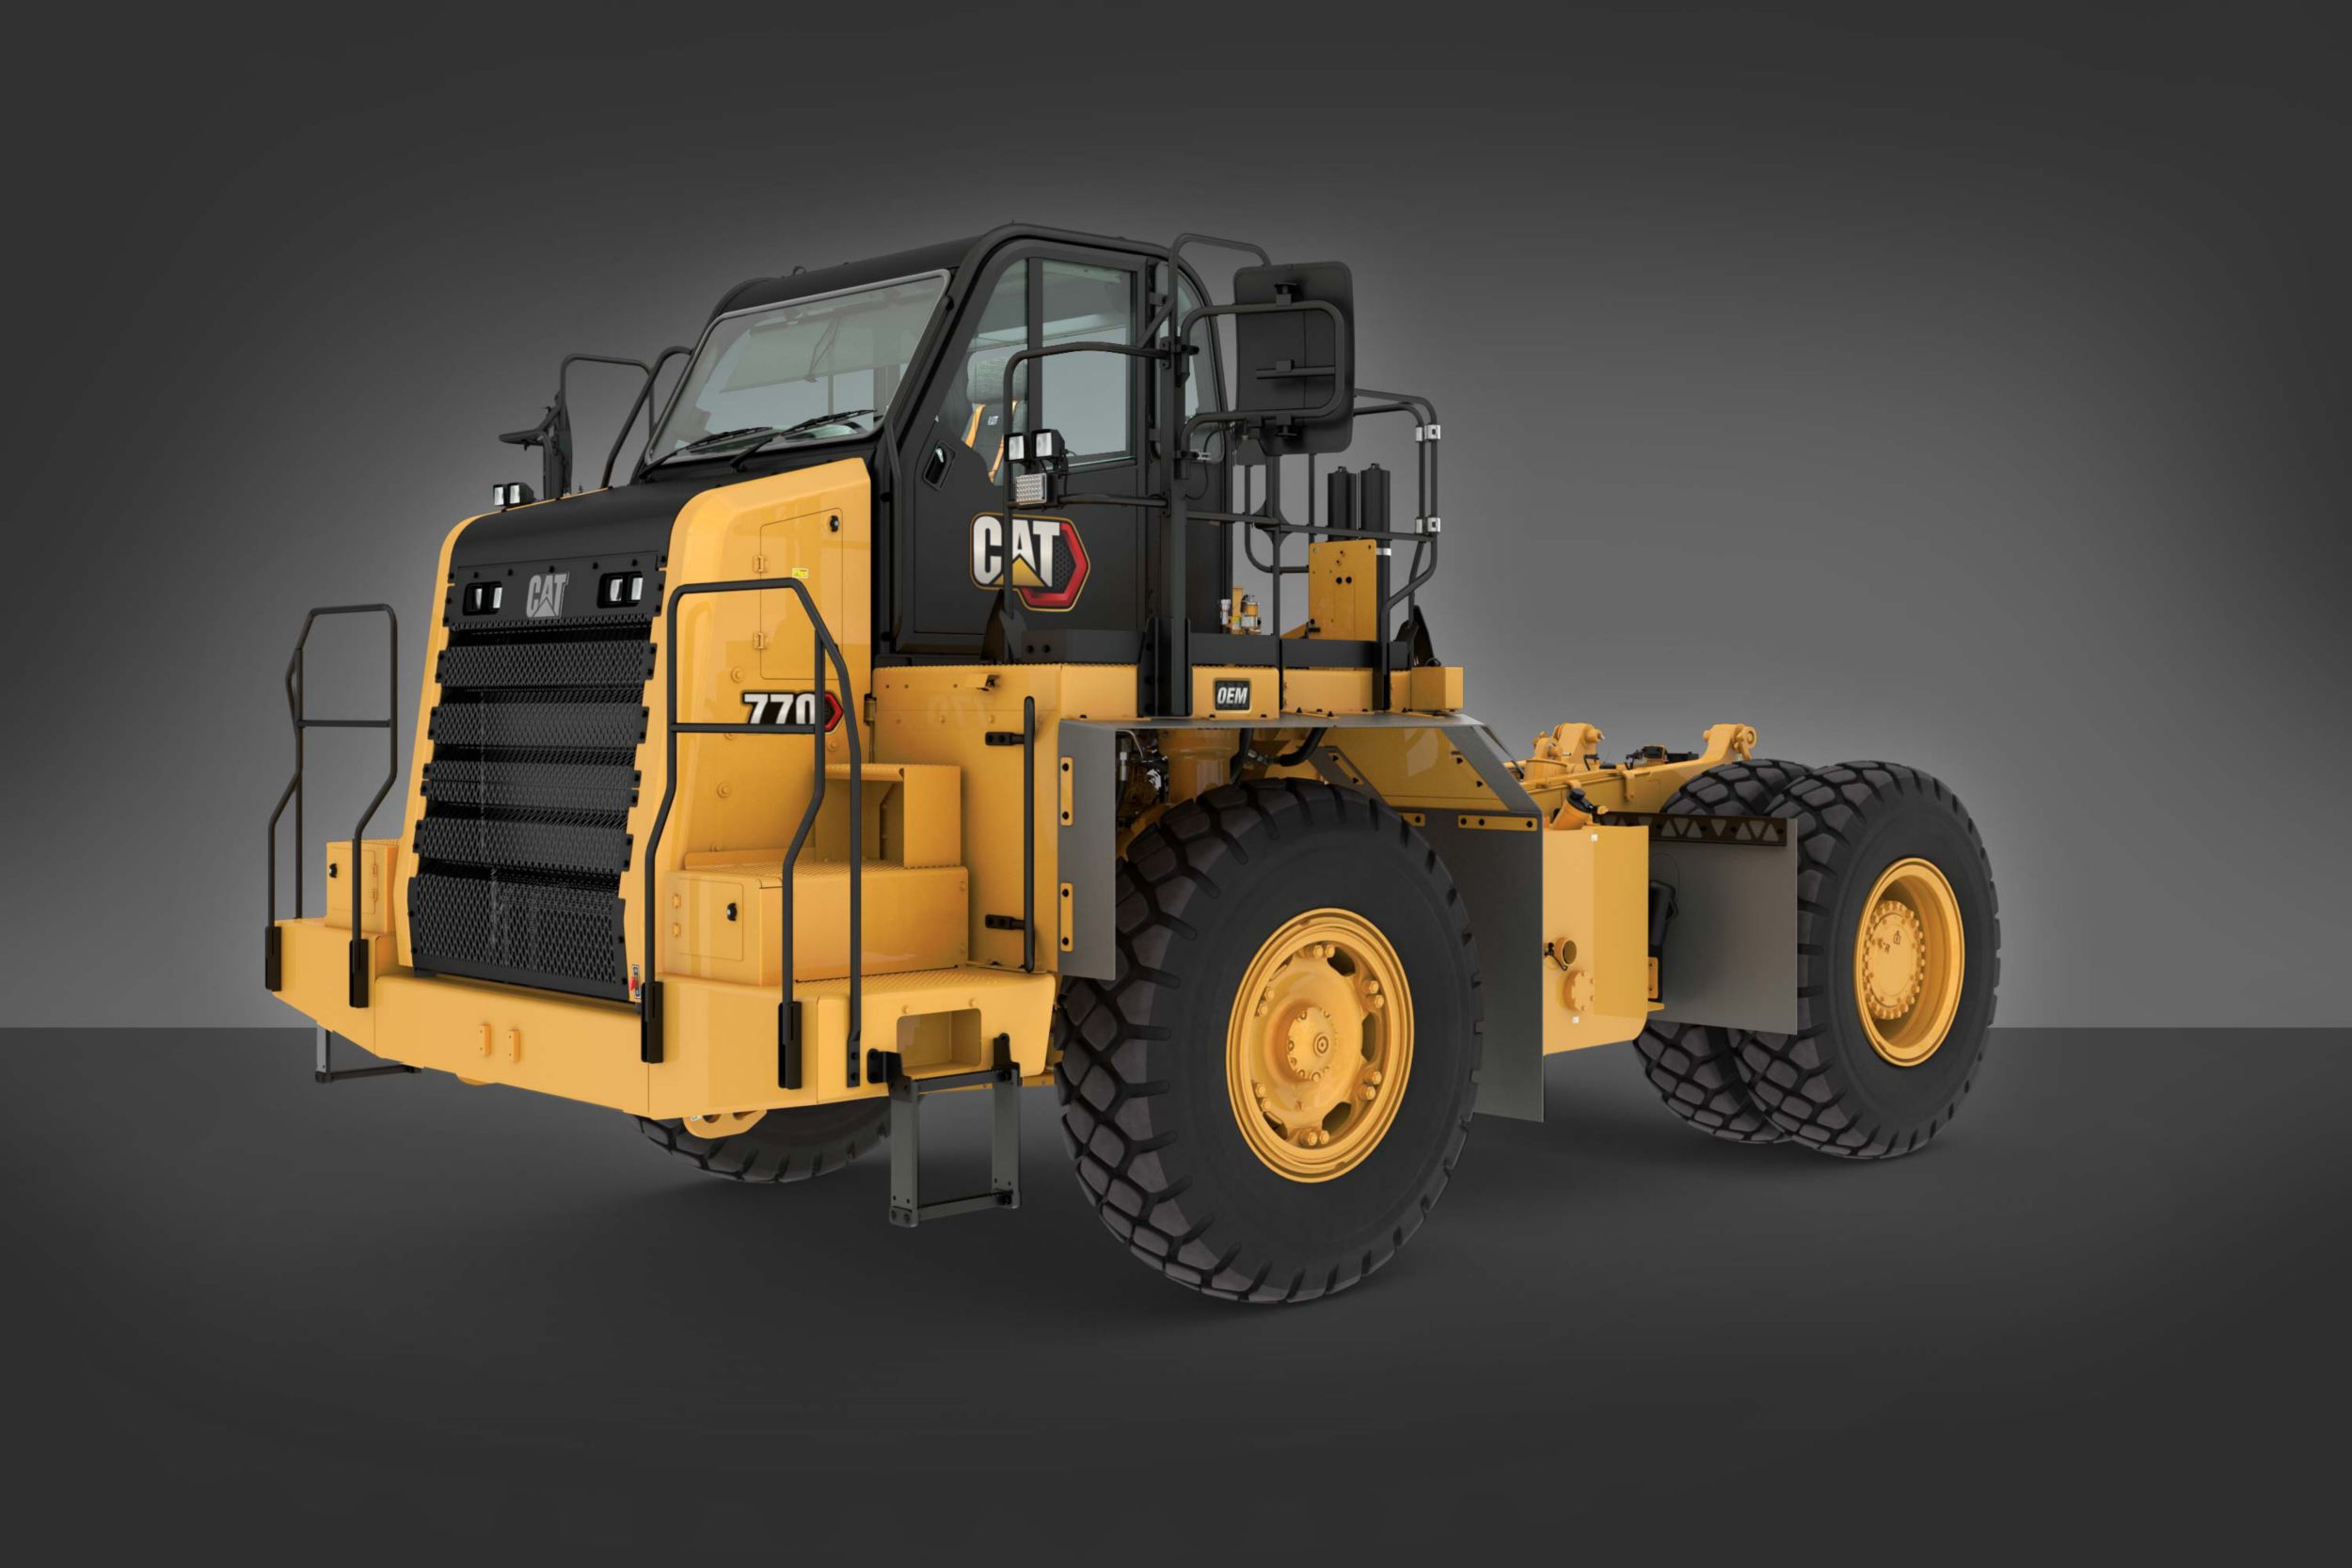 The Cat 770 bare chassis comes equipped with a higher Tractor ROPS certification ratings needed for specialty machines including water trucks, tow trucks, and fuel and lube trucks.